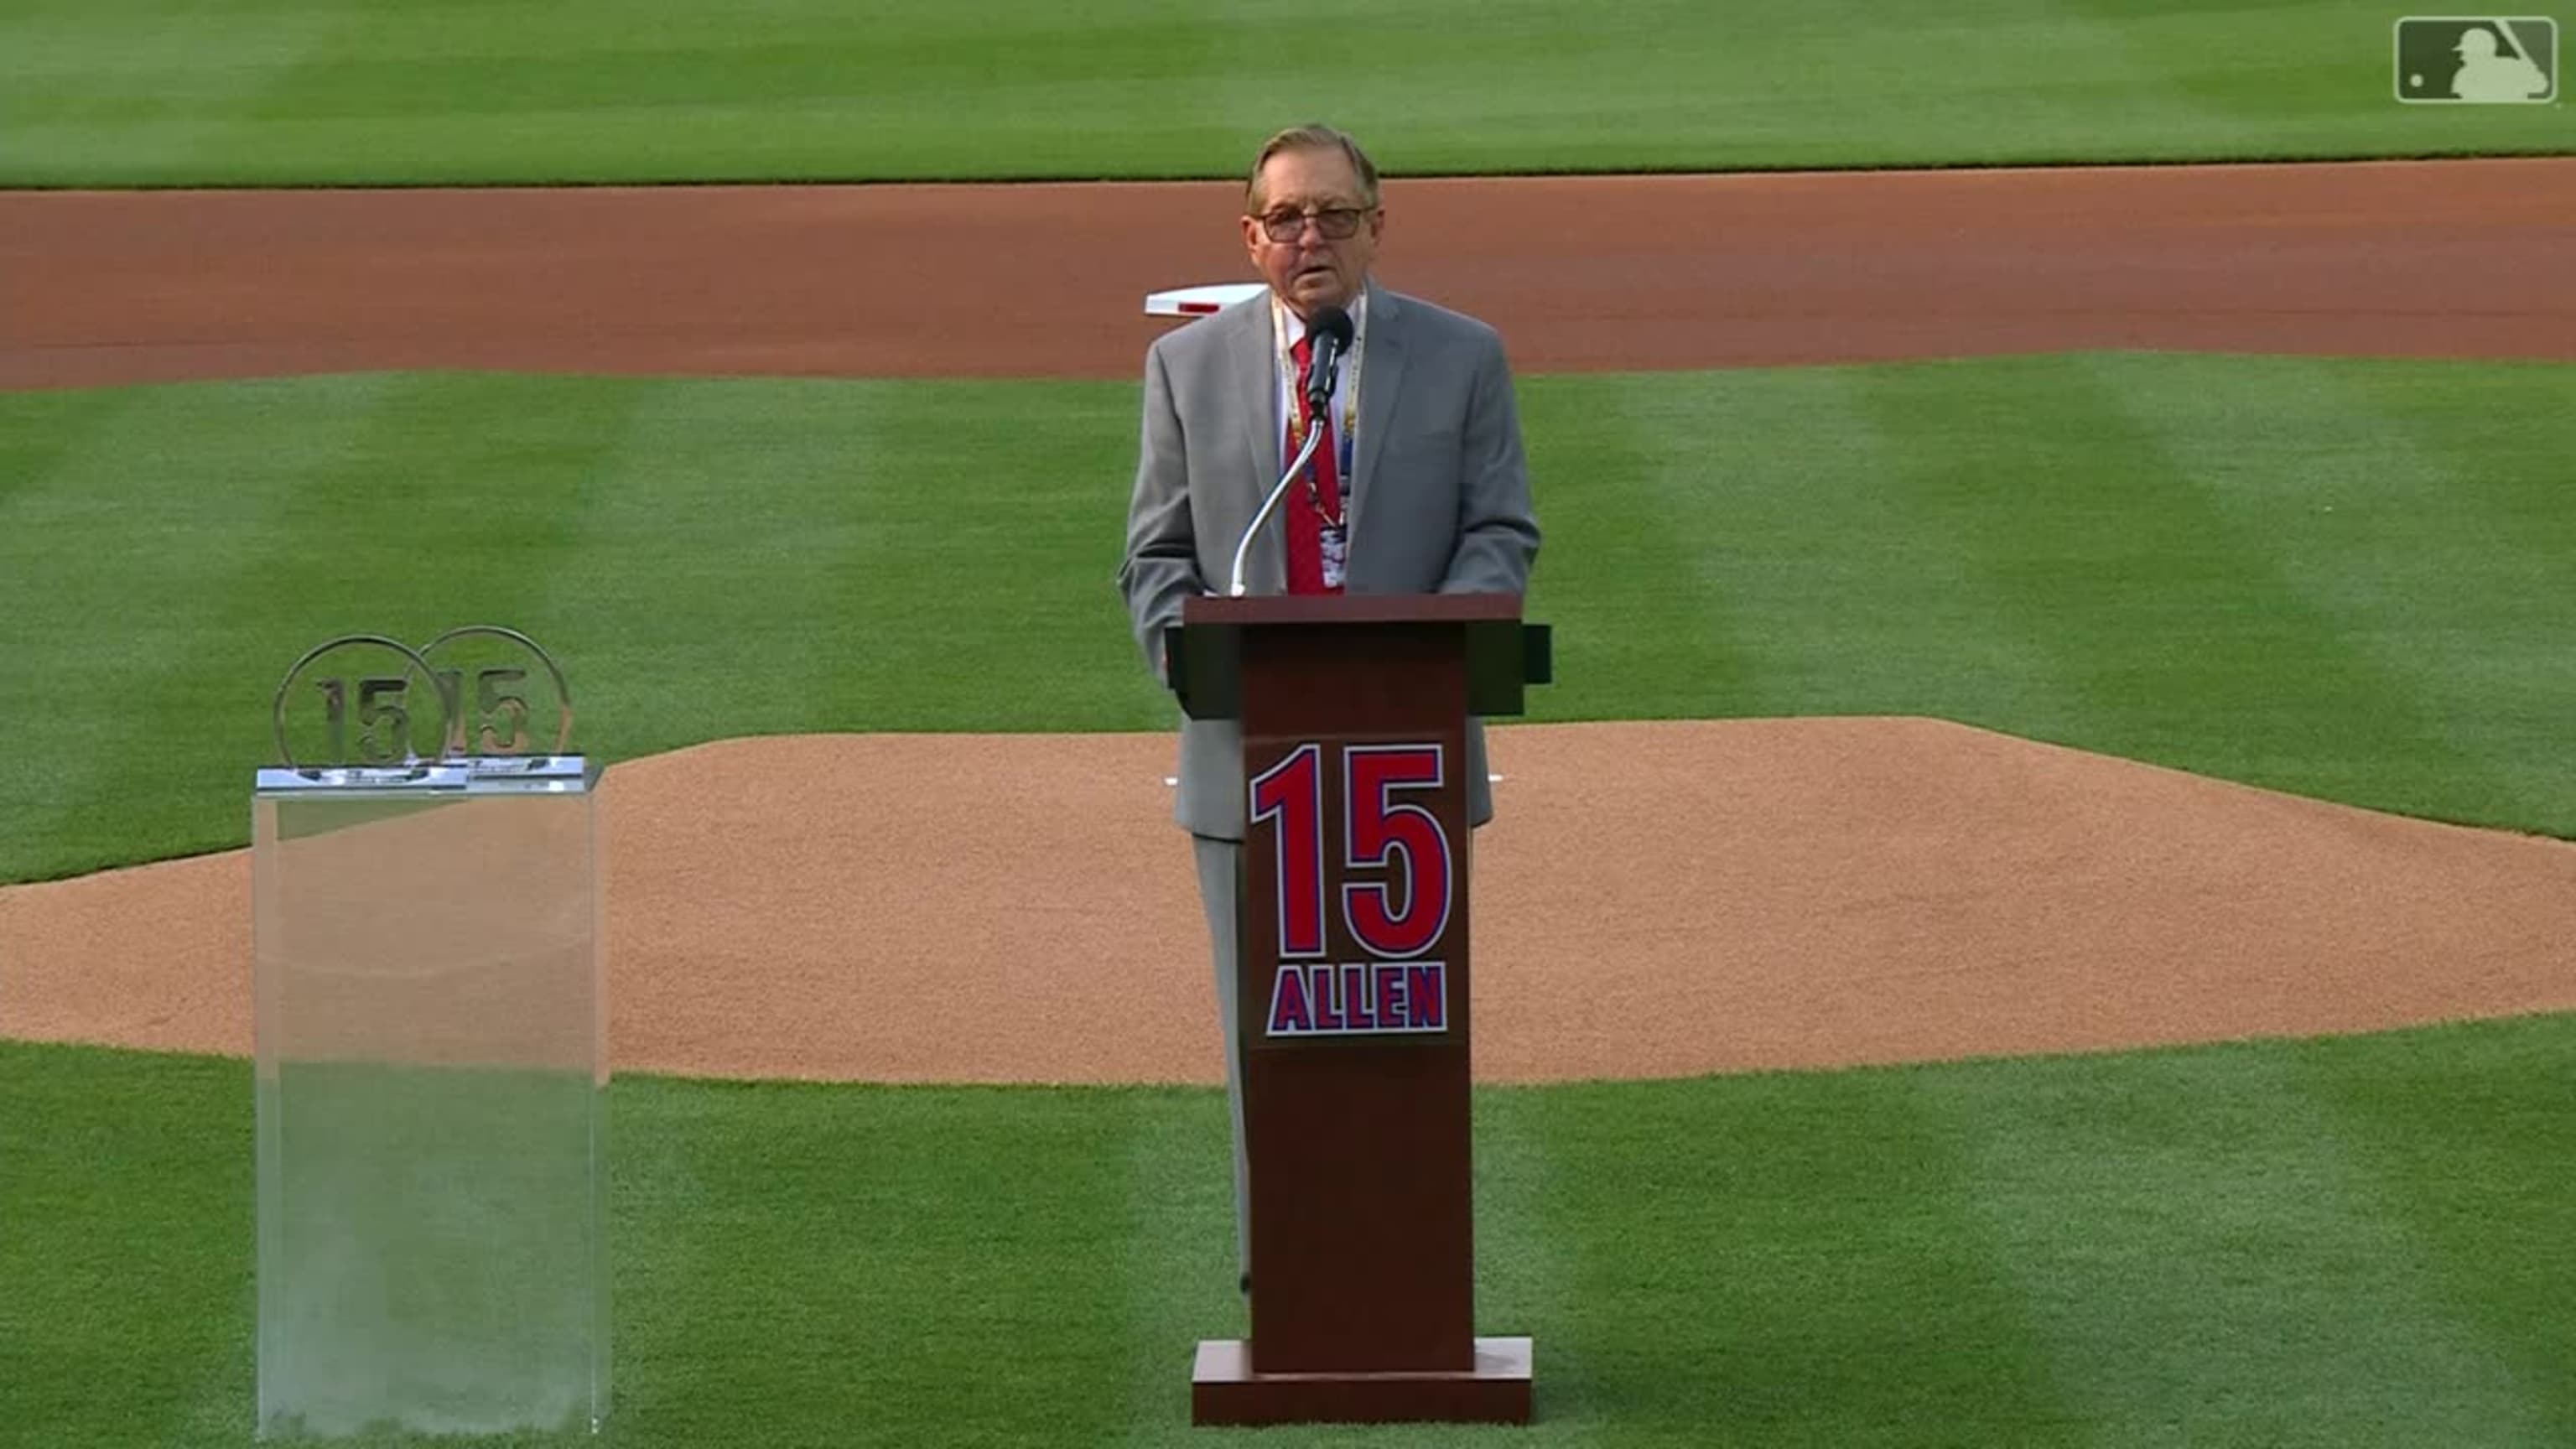 Phillies and City of Philadelphia honor Dick Allen with field dedication